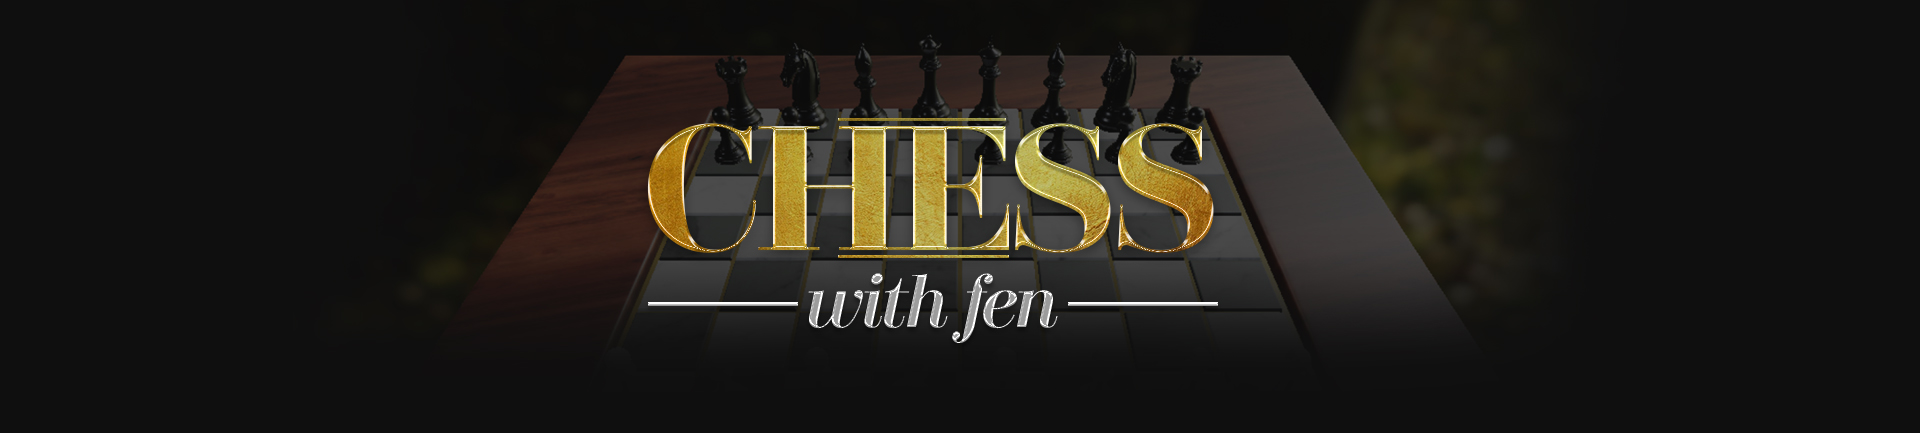 Chess: with fen